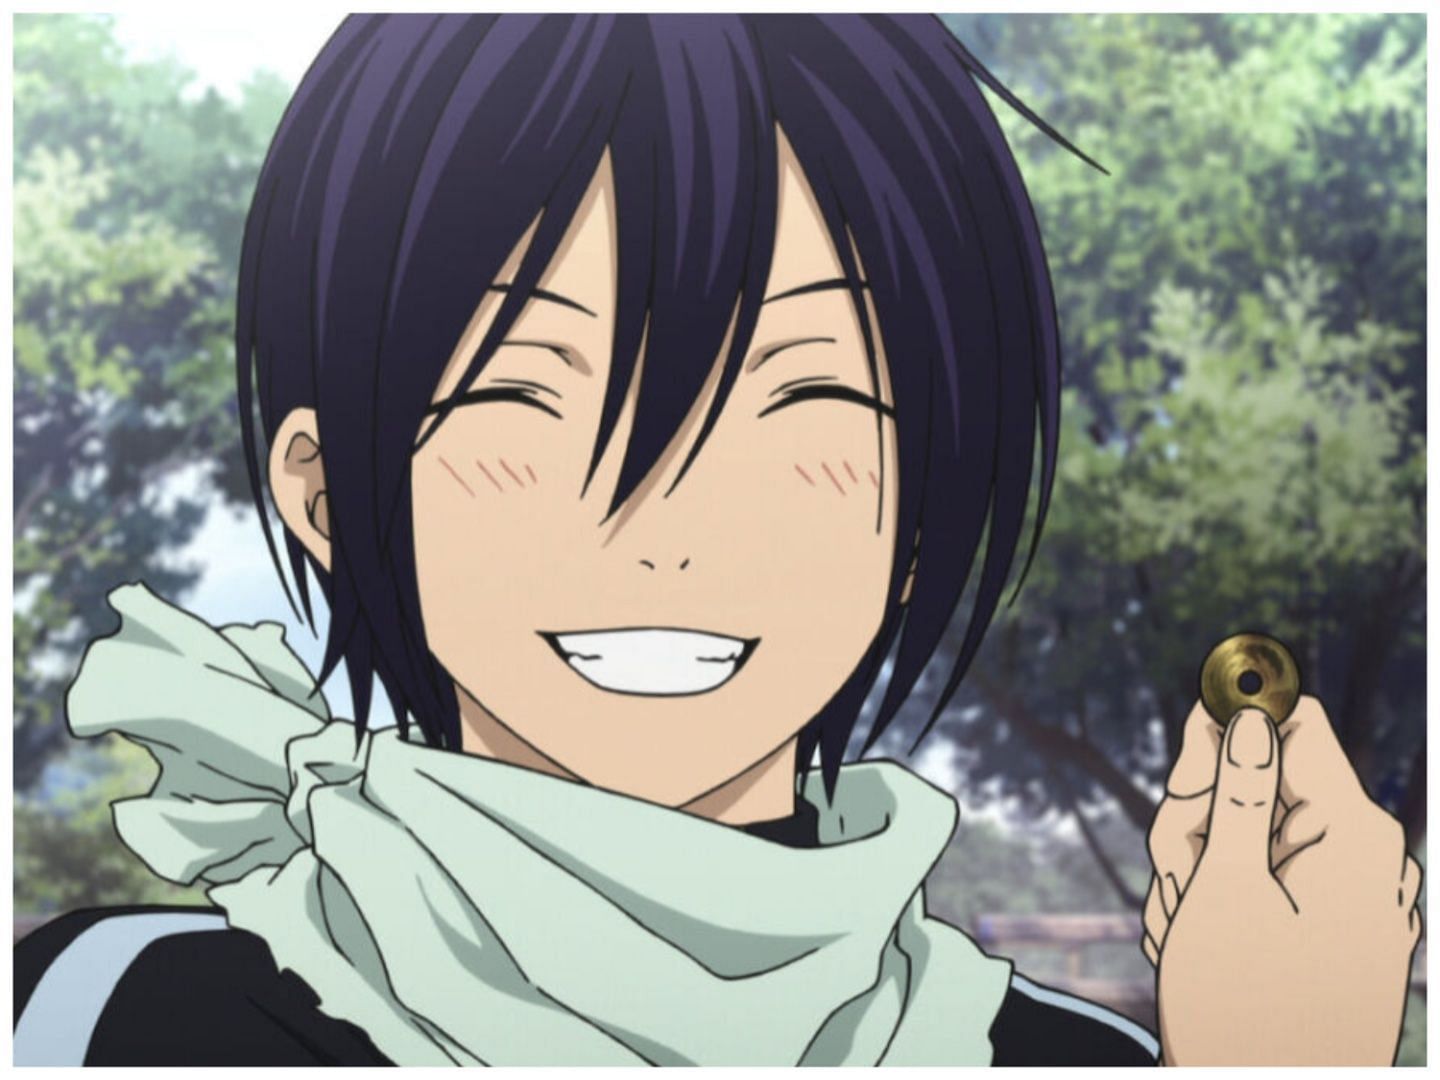 Manga written by women: Noragami (ノラガミ, Noragami) is a Japanese anime series produced by Studio Bones. The first season contained 12 episodes. (Image via Studio Bones)